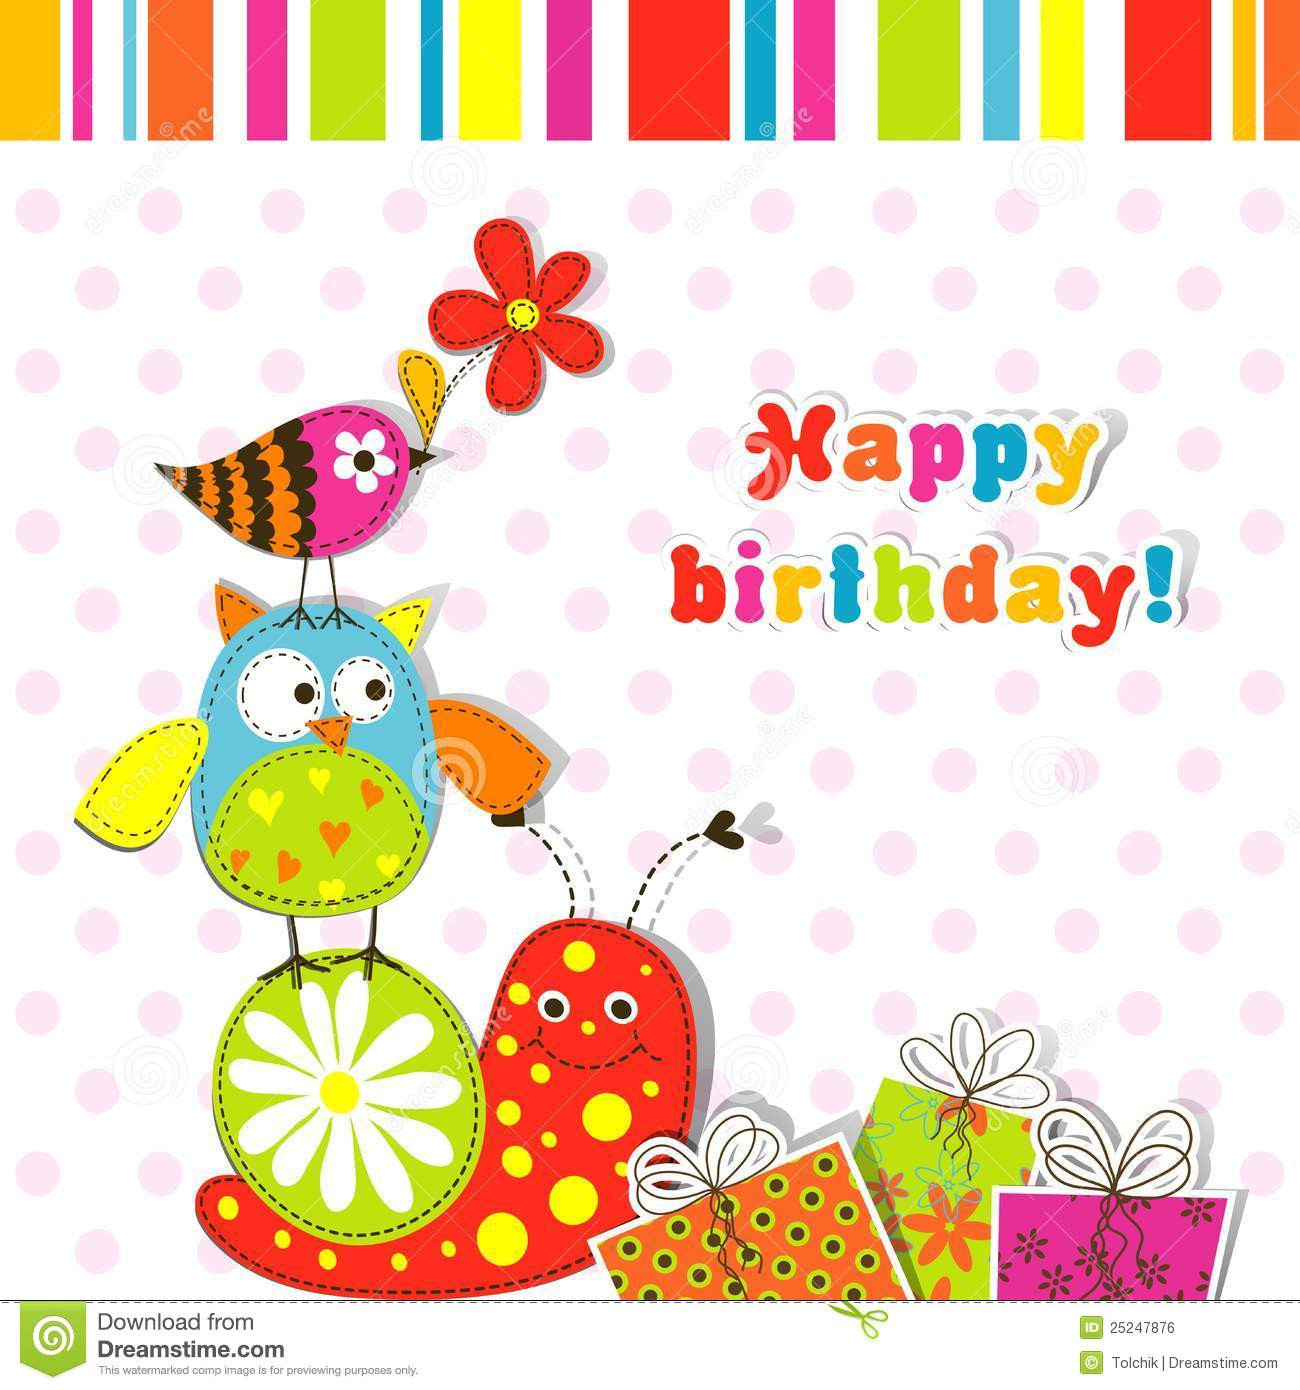 Best ideas about Birthday Card Template
. Save or Pin Birthday Card Template Now.